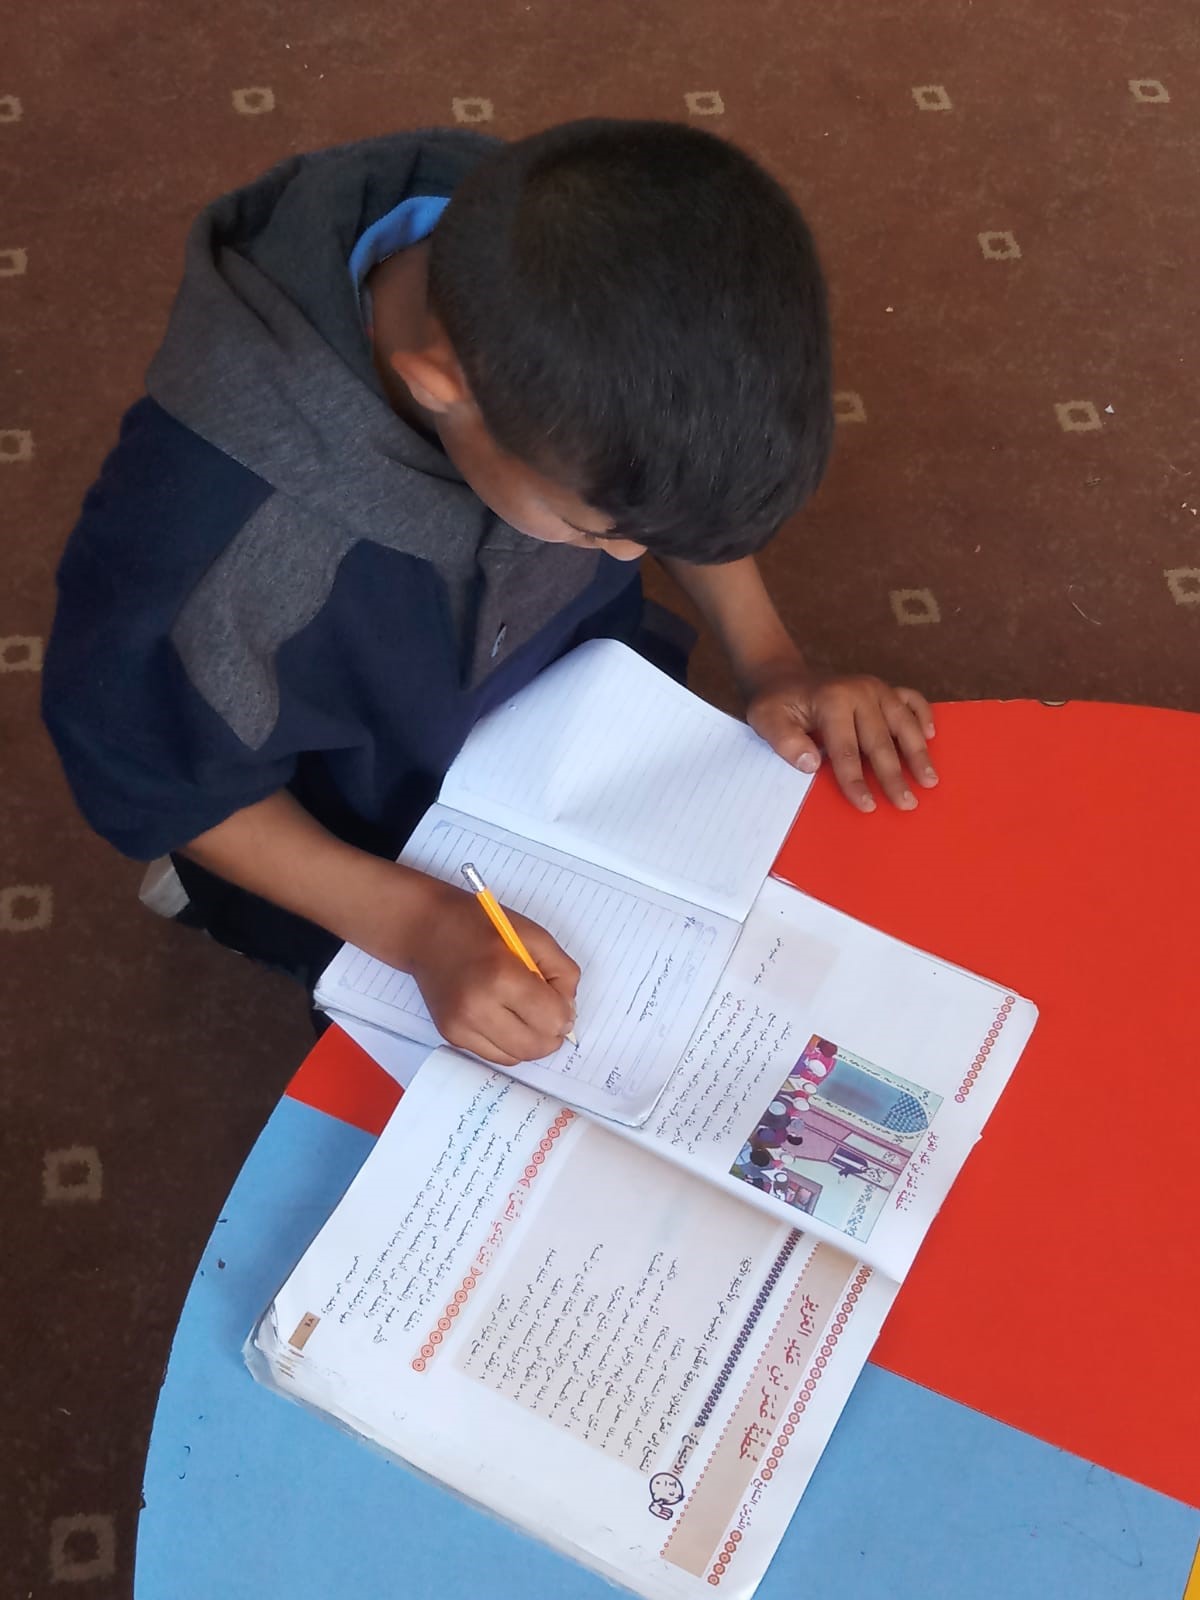 Abdallah reviewing his homework at Tdh Protection centre. © Photo by Terre des hommes